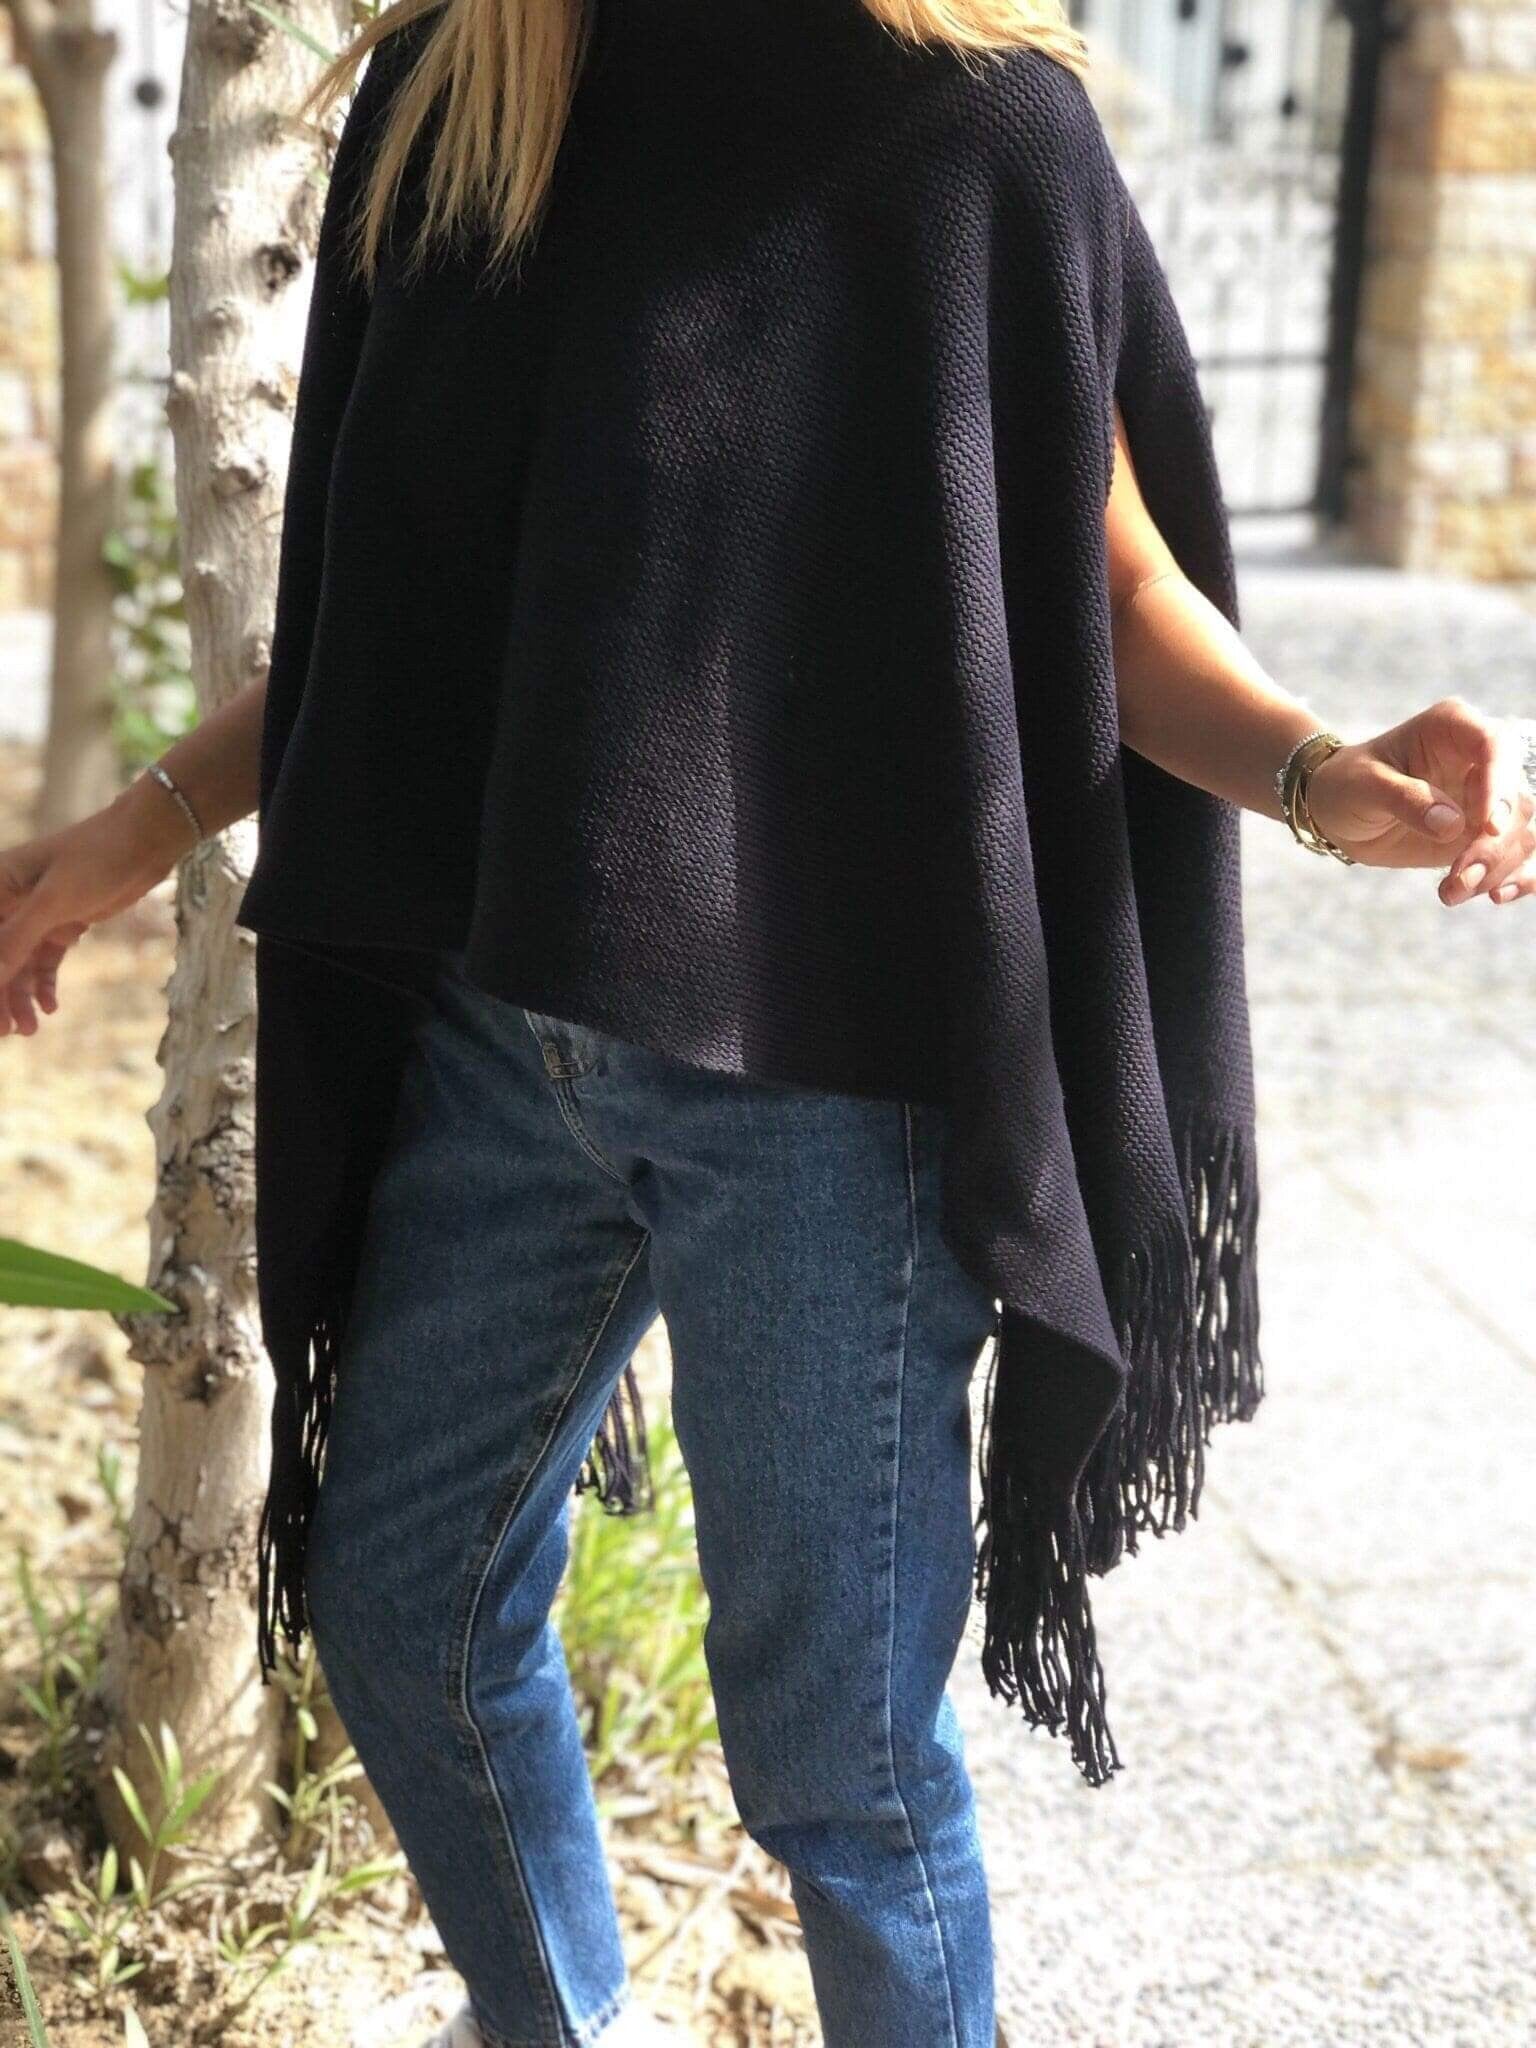 Our Winter Autumn Poncho makes for a thoughtful and practical gift for any fashion-forward friend.